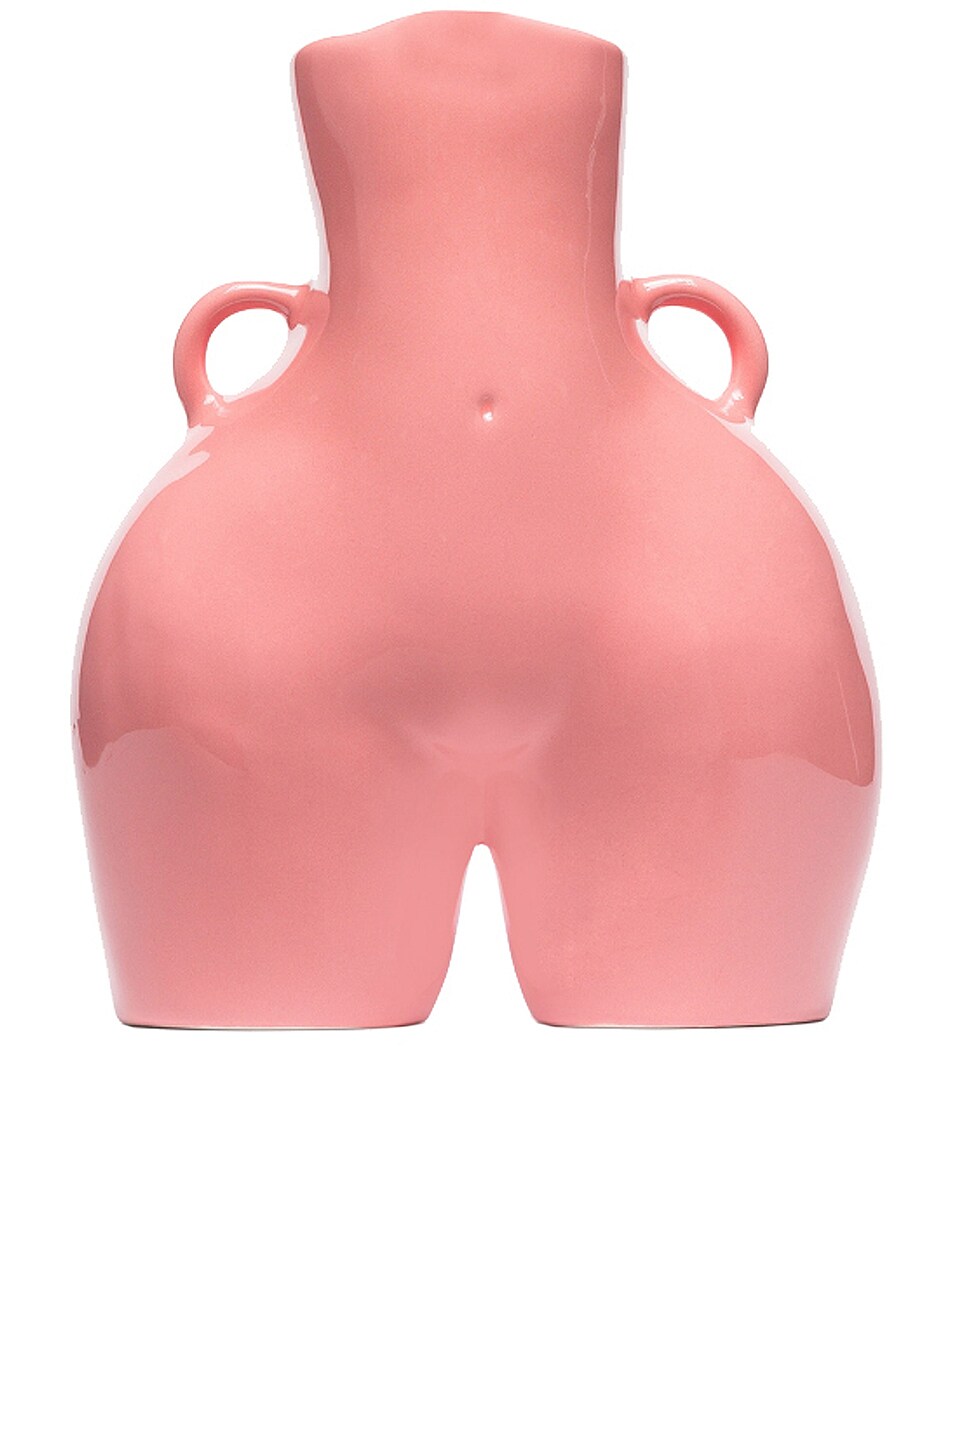 Image 1 of Anissa Kermiche Love Handles Vase in High Shine Rose